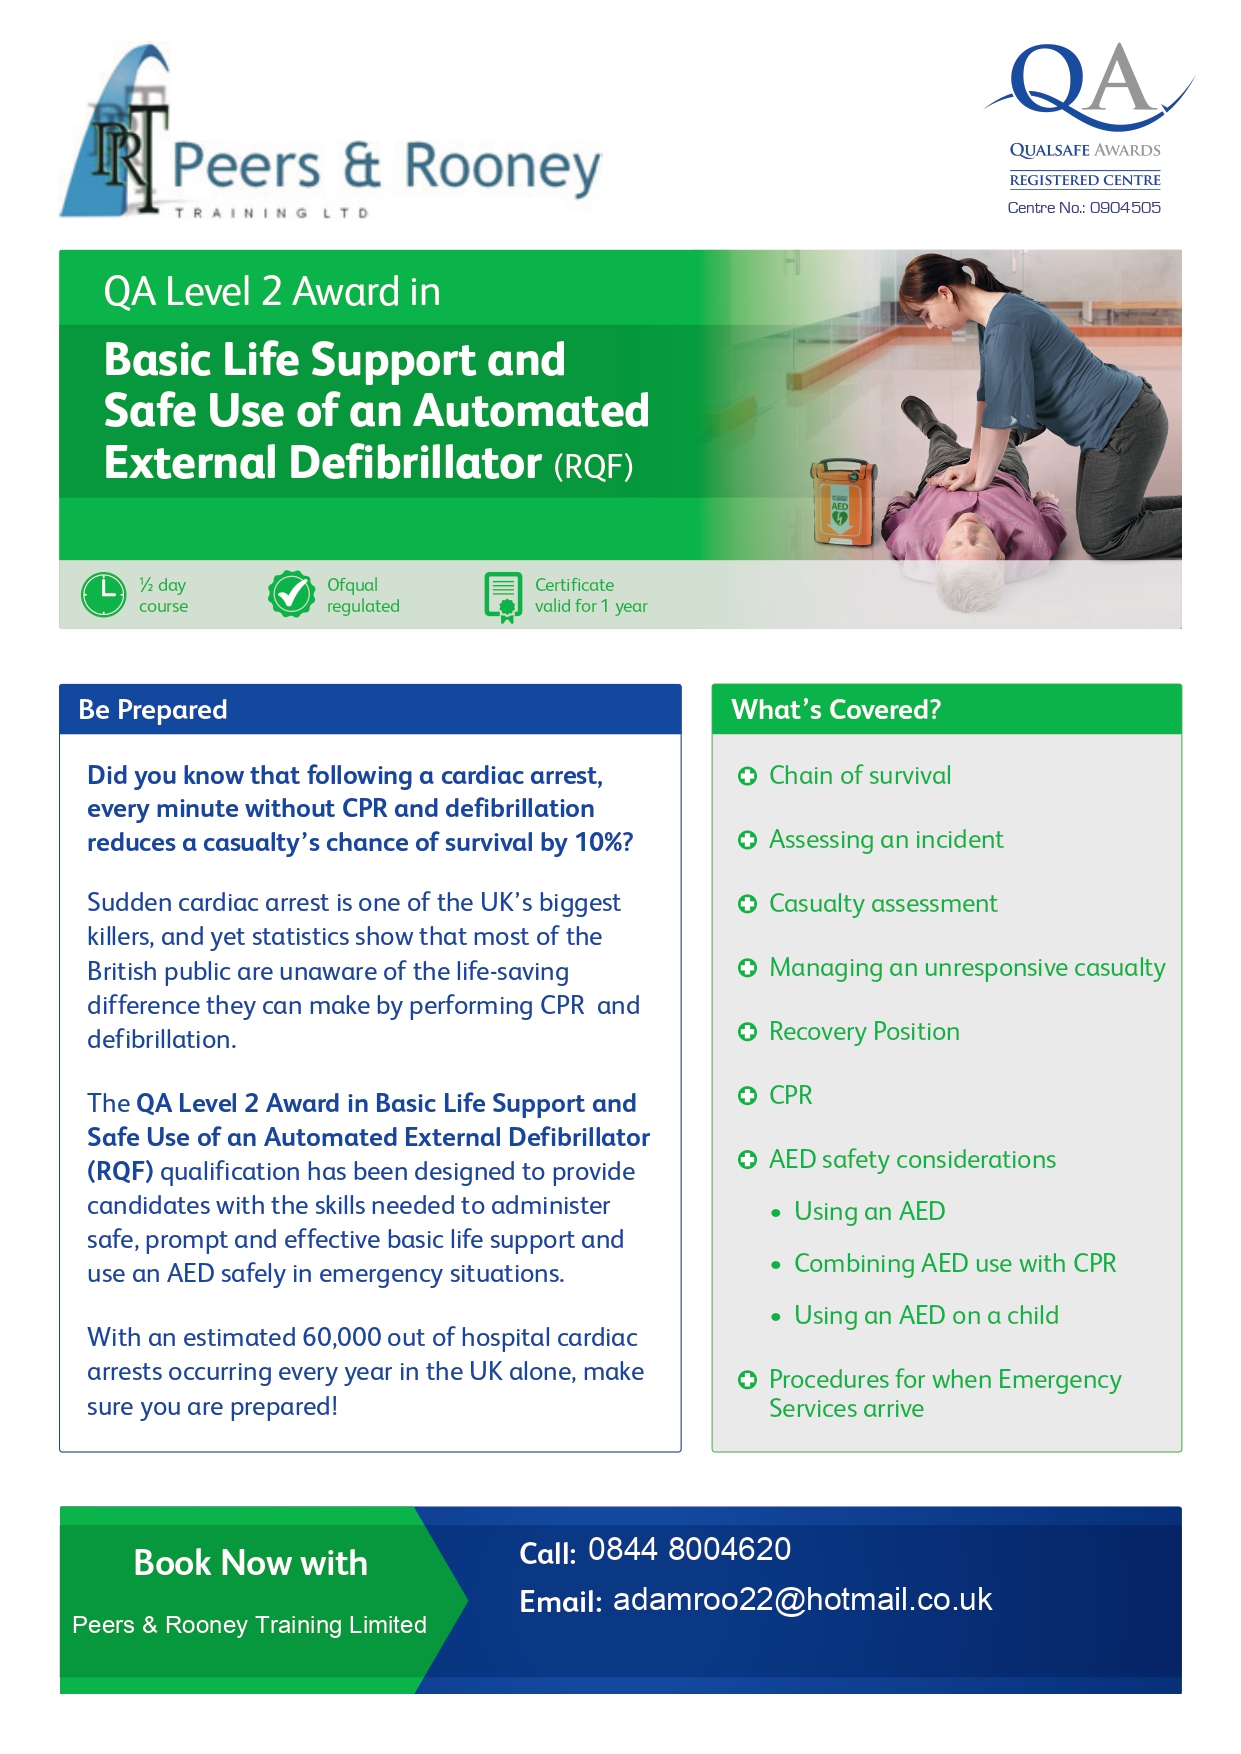 Basic Life Support and Safe Use of an Automated External Defibrillator